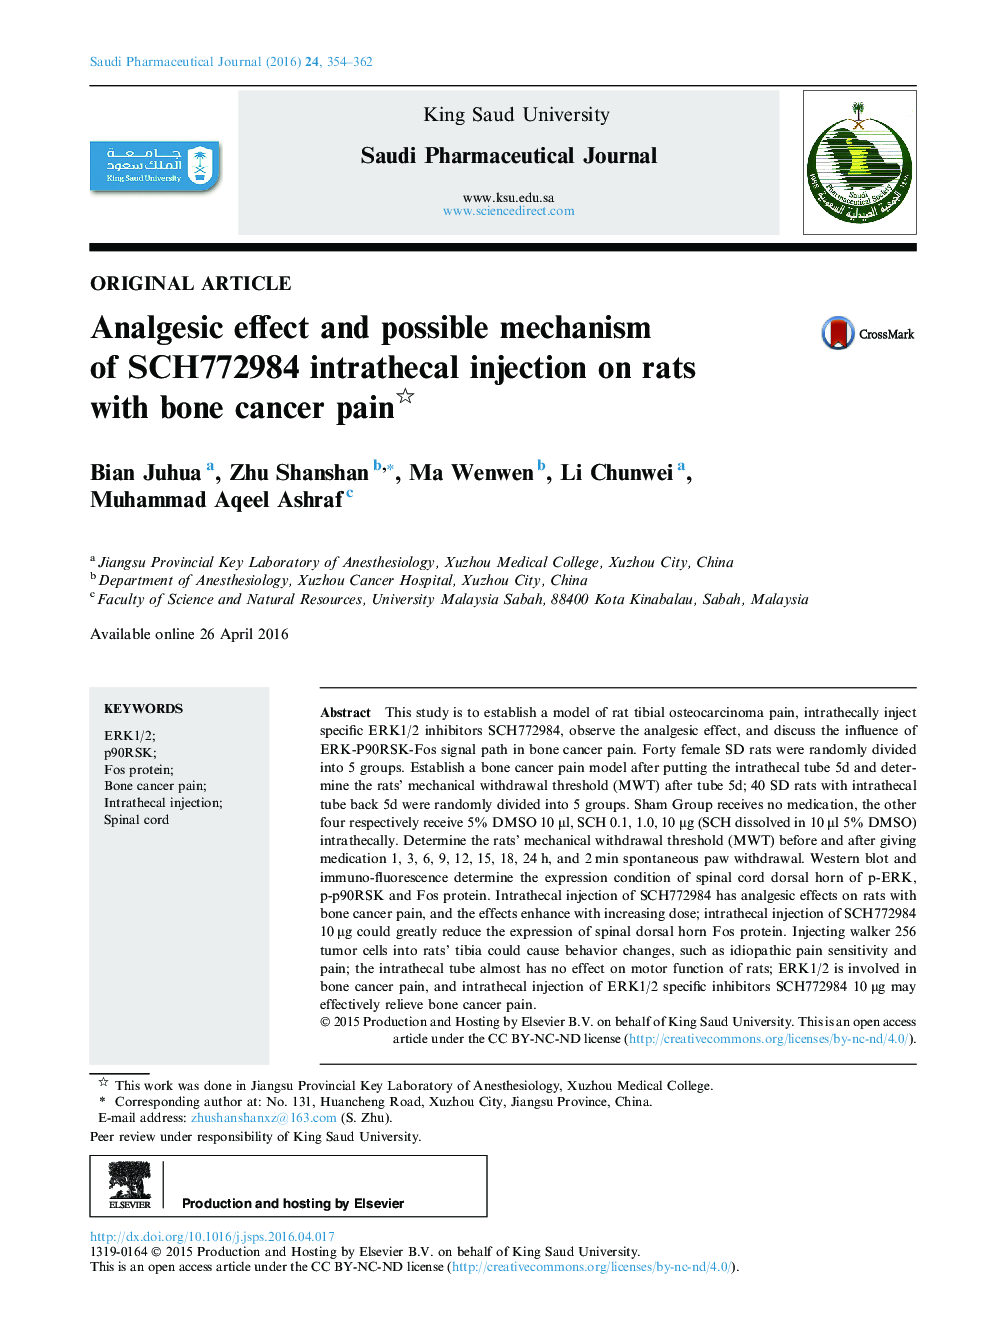 Analgesic effect and possible mechanism of SCH772984 intrathecal injection on rats with bone cancer pain 